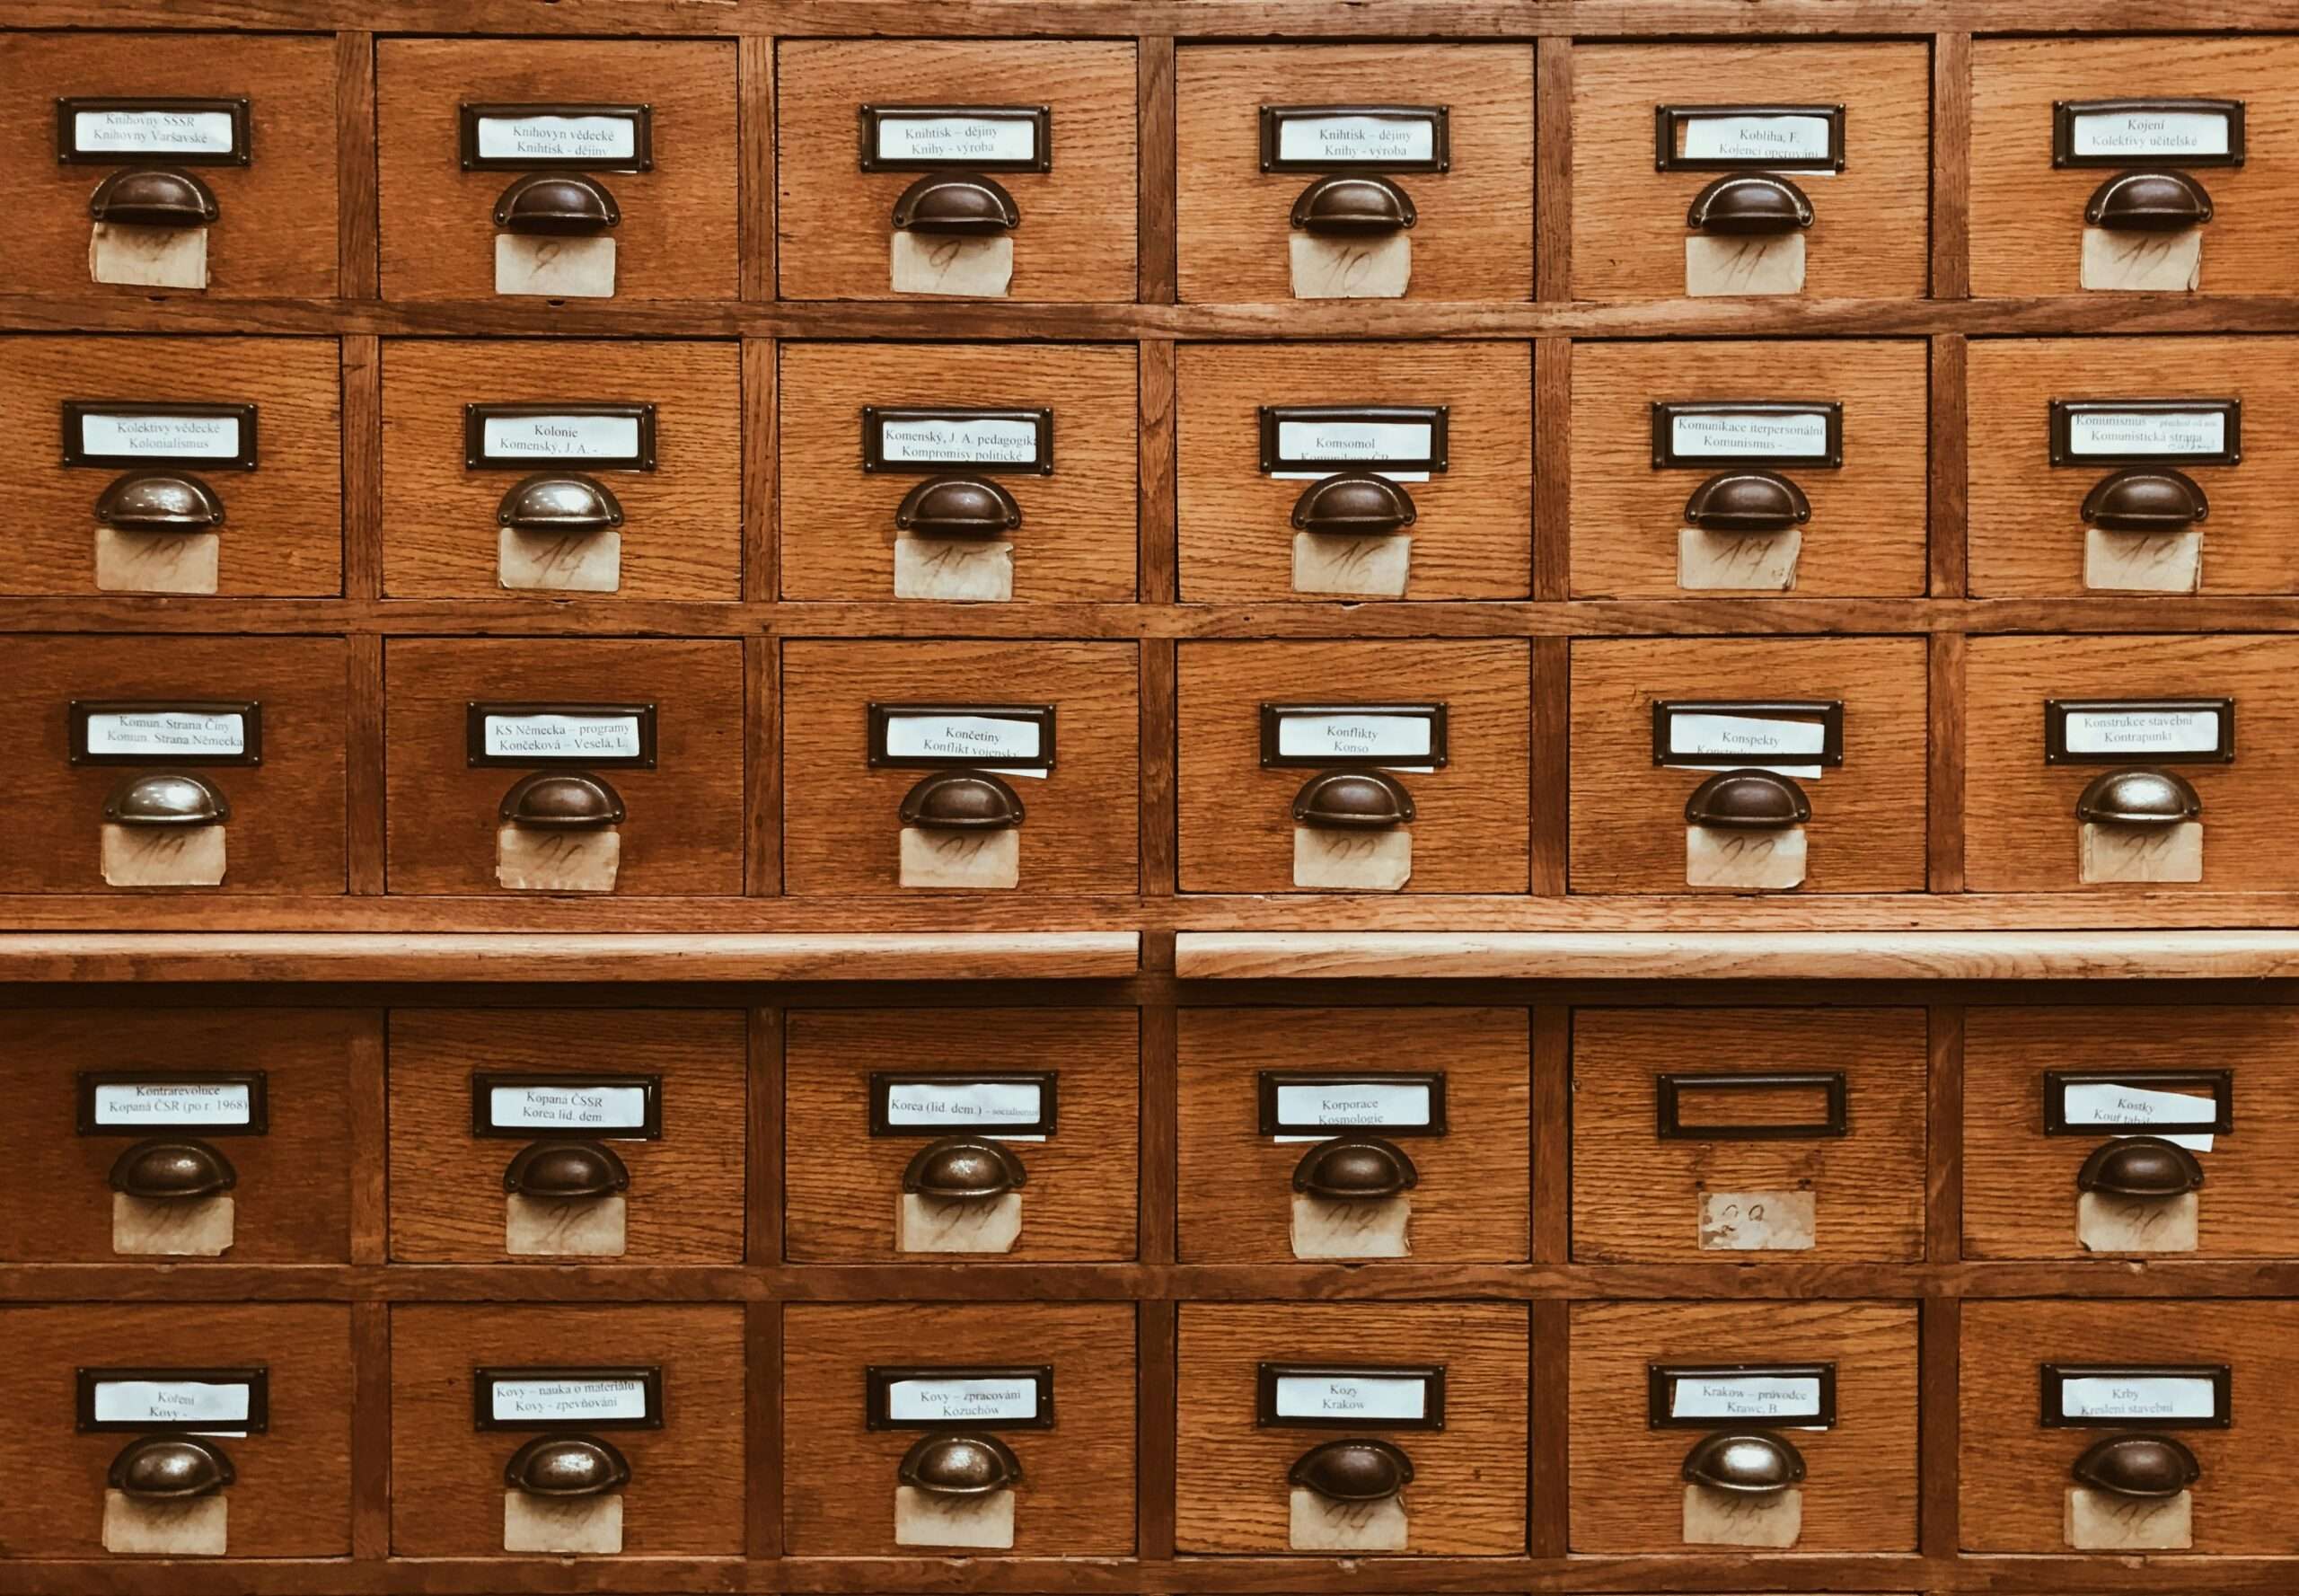 A library card catalogue showing multiple organization squares.